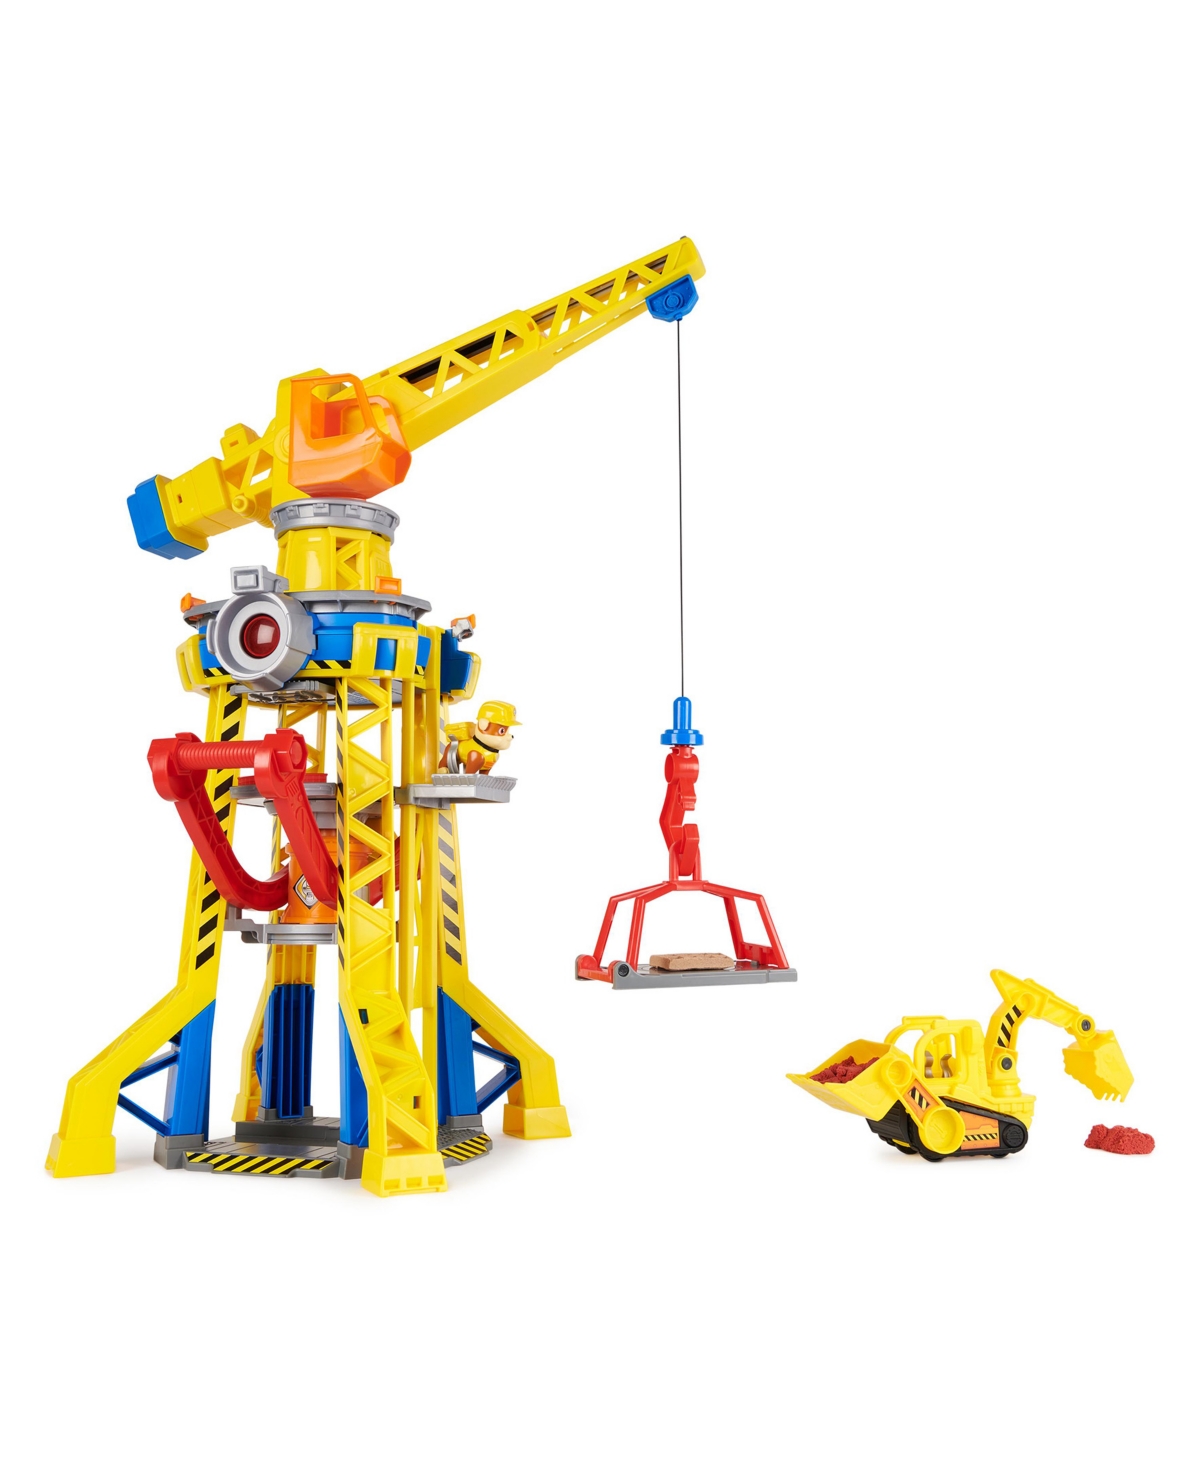 Rubble & Crew Kids' , Bark Yard Crane Tower Playset With Rubble Action Figure, Toy Bulldozer Kinetic Build-it Play Sand, In Multi